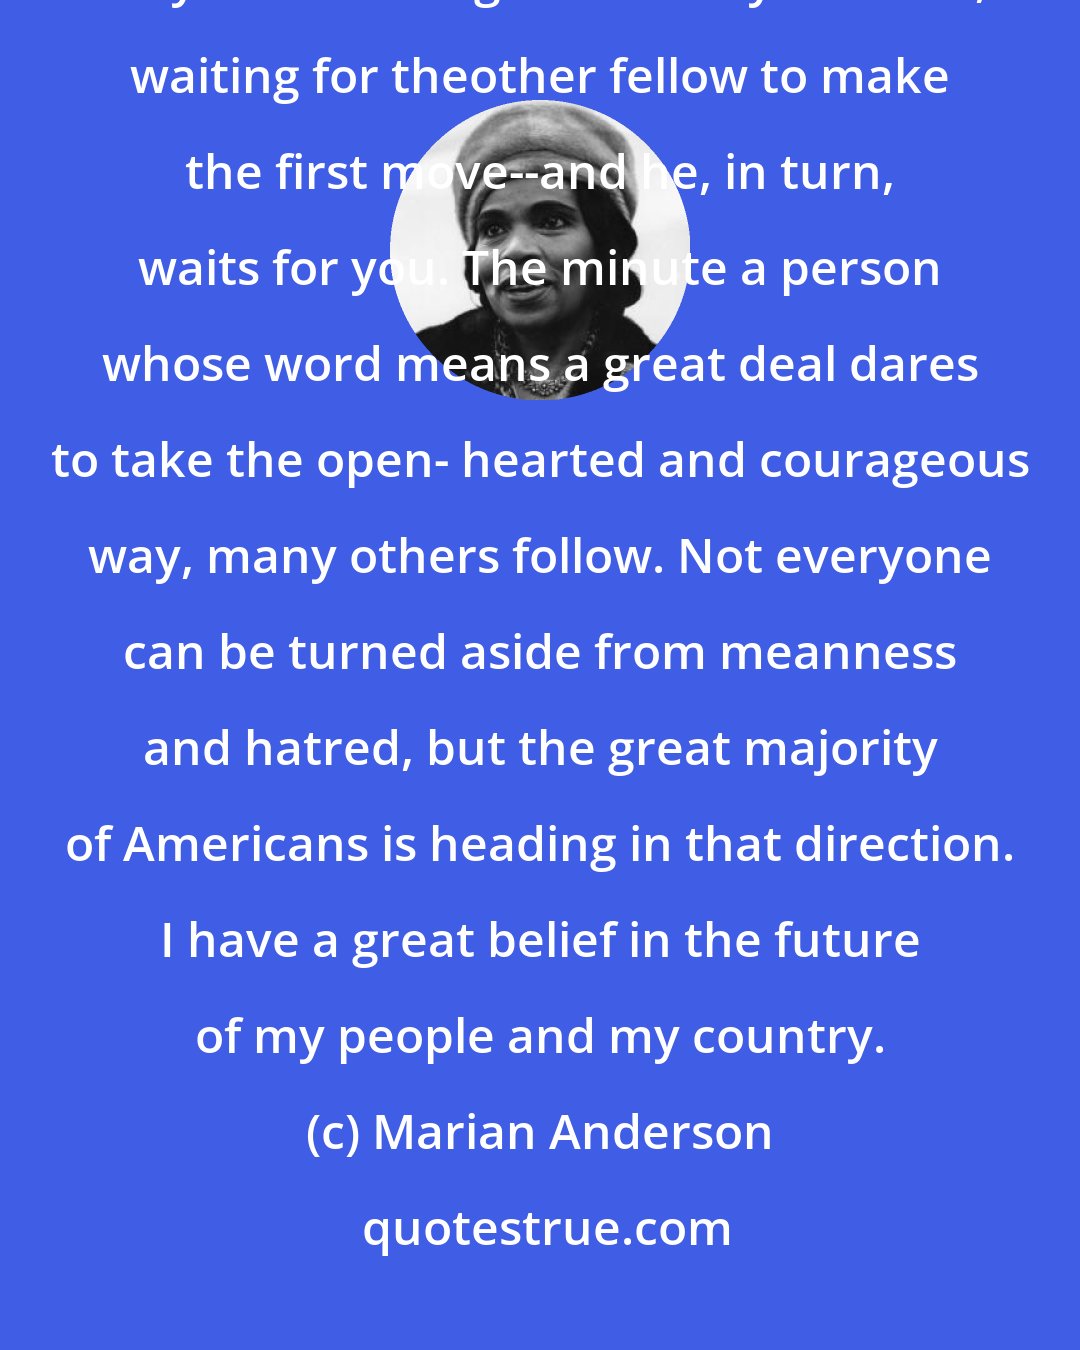 Marian Anderson: There are many persons ready to do what is right because in their hearts they know it is right. But they hesitate, waiting for theother fellow to make the first move--and he, in turn, waits for you. The minute a person whose word means a great deal dares to take the open- hearted and courageous way, many others follow. Not everyone can be turned aside from meanness and hatred, but the great majority of Americans is heading in that direction. I have a great belief in the future of my people and my country.